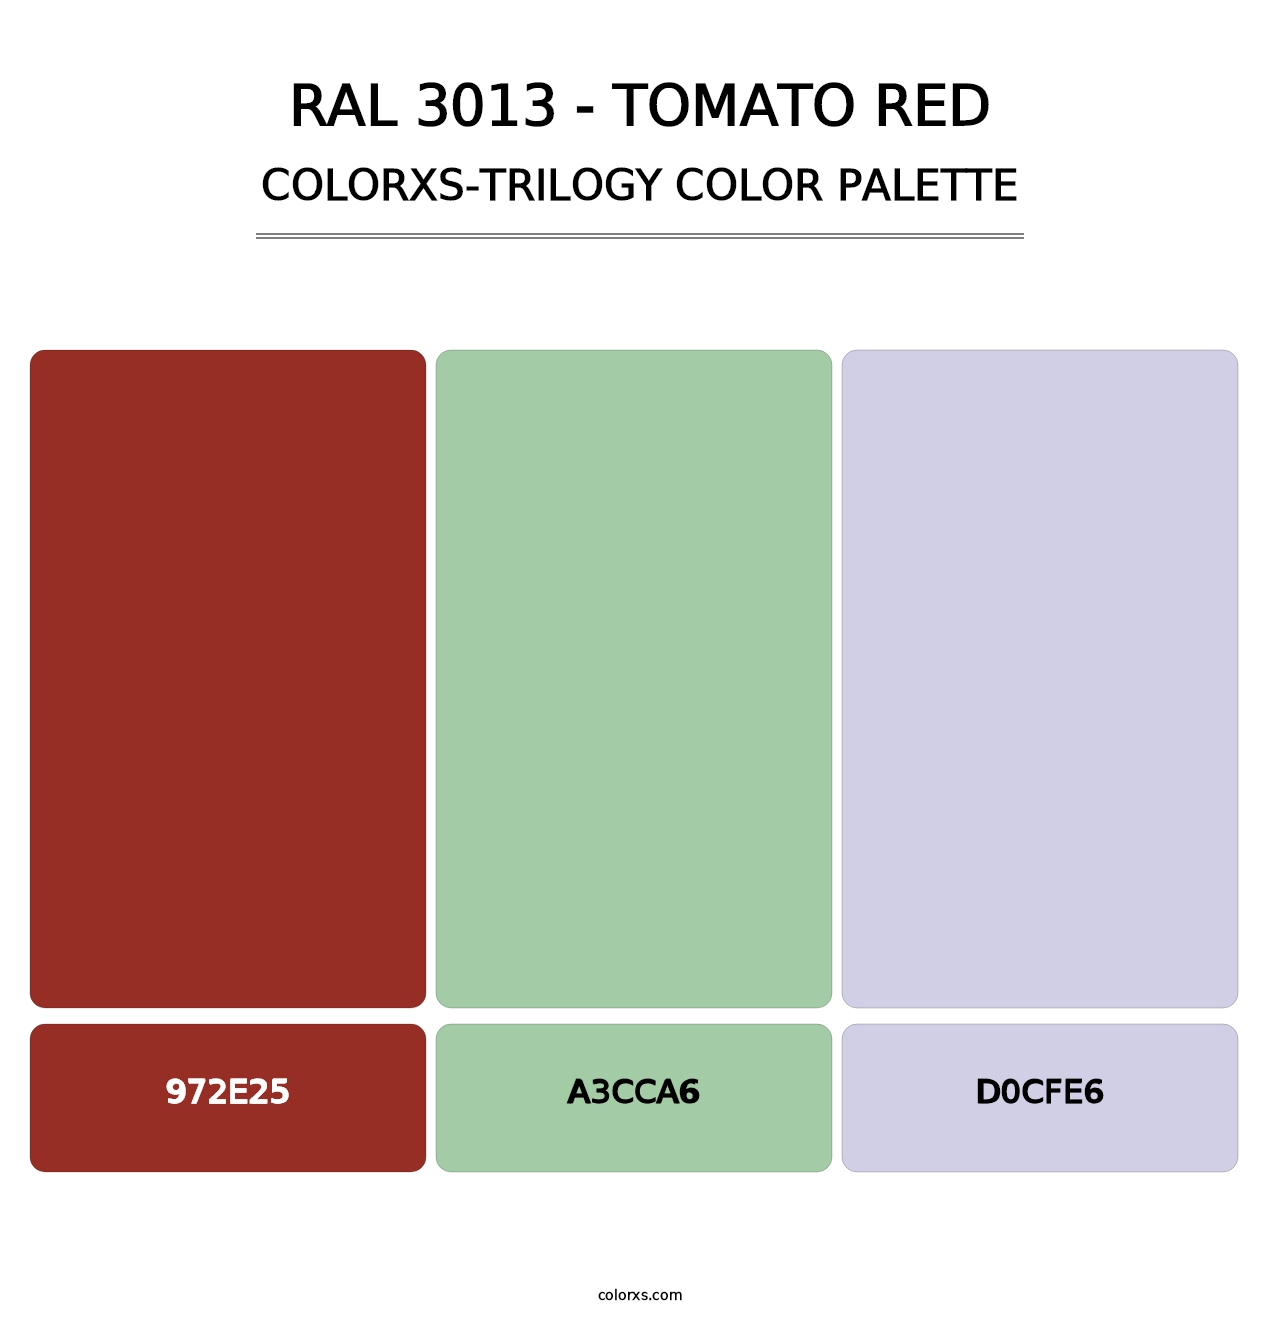 RAL 3013 - Tomato Red - Colorxs Trilogy Palette